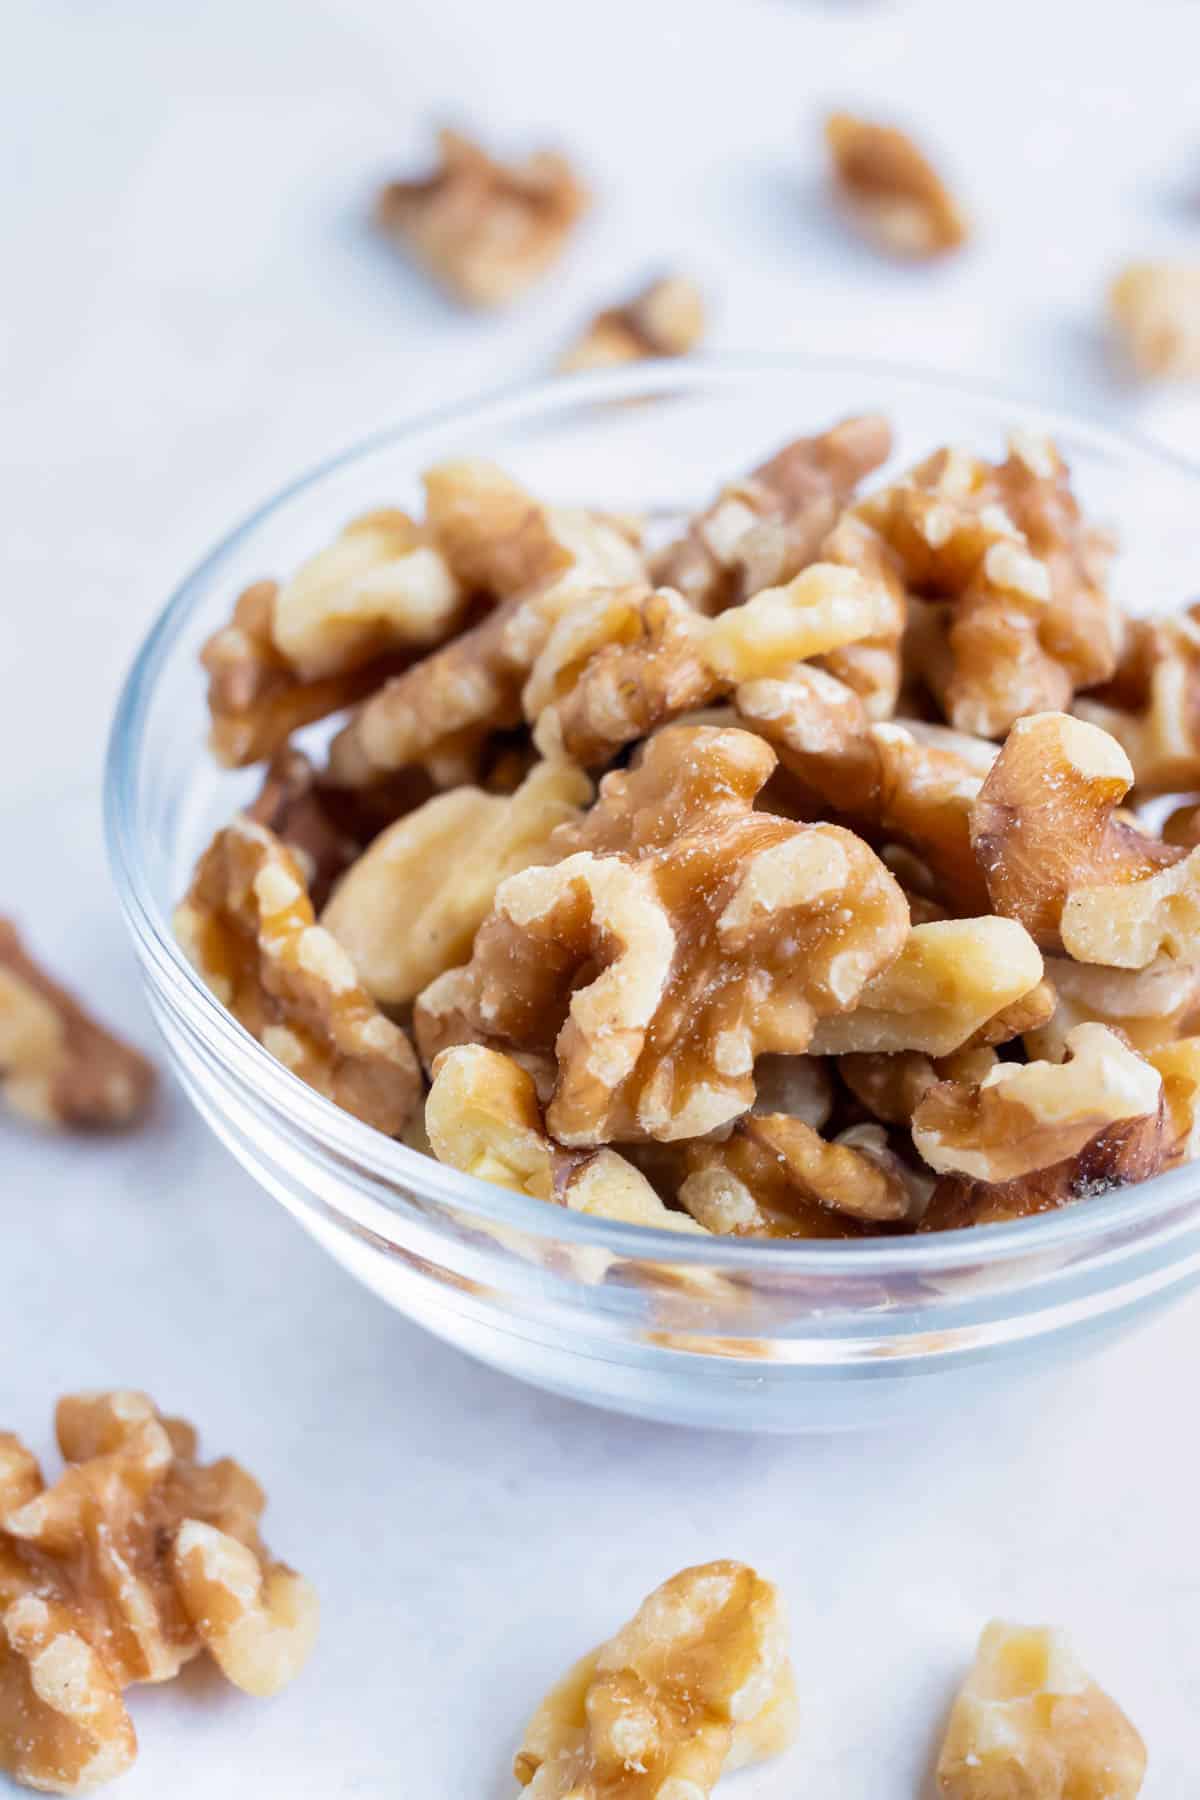 Toasted walnuts are placed in a bowl for a snack.